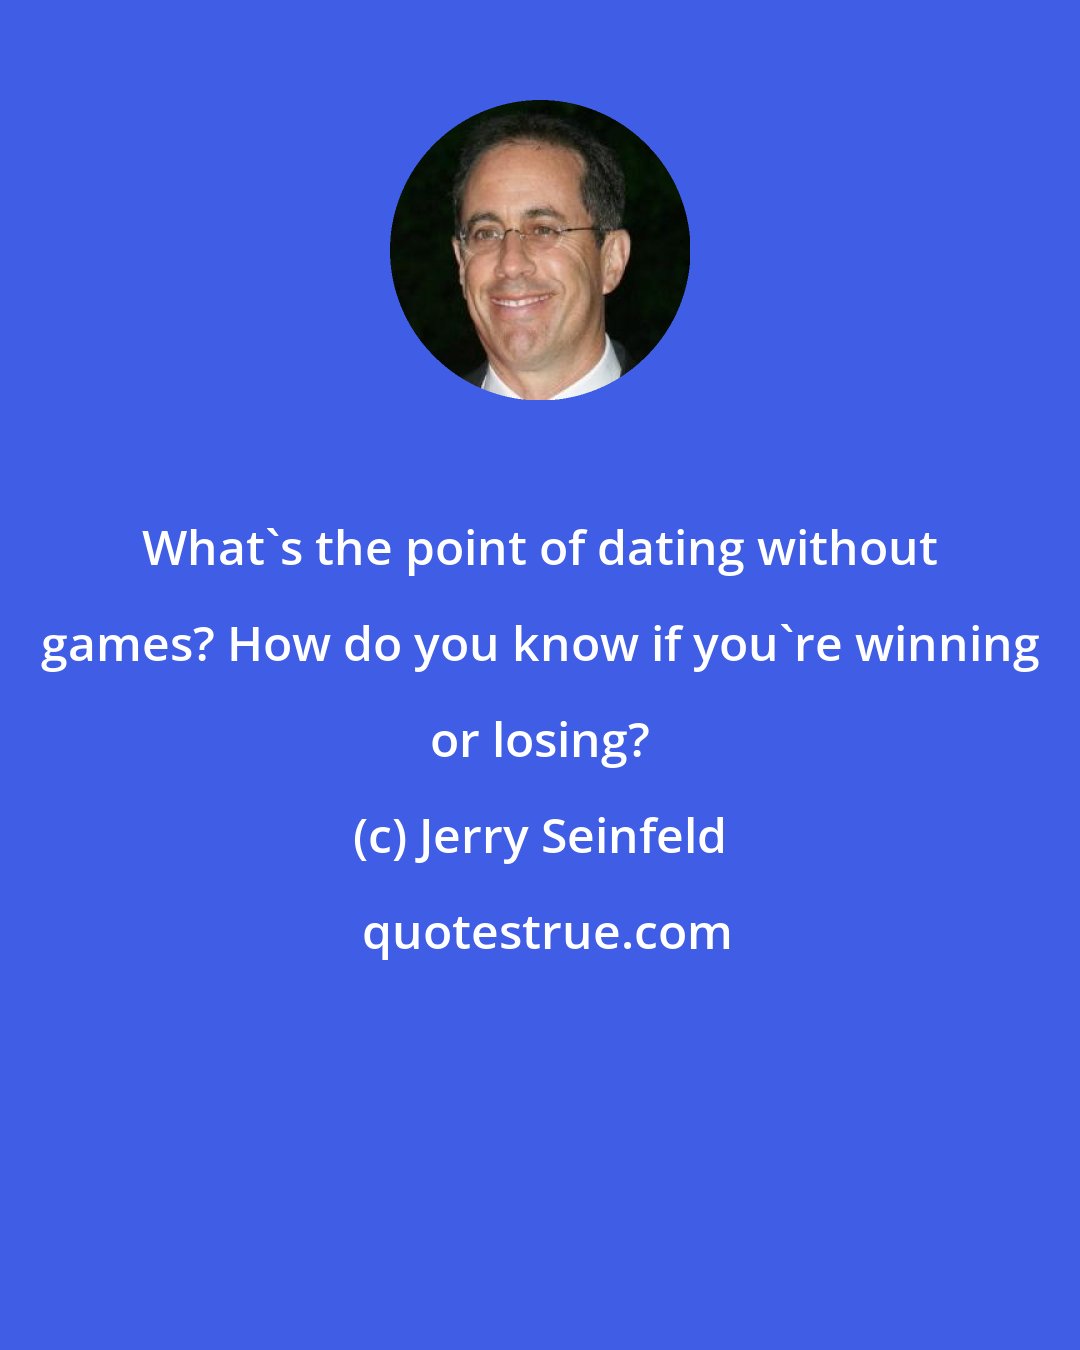 Jerry Seinfeld: What's the point of dating without games? How do you know if you're winning or losing?